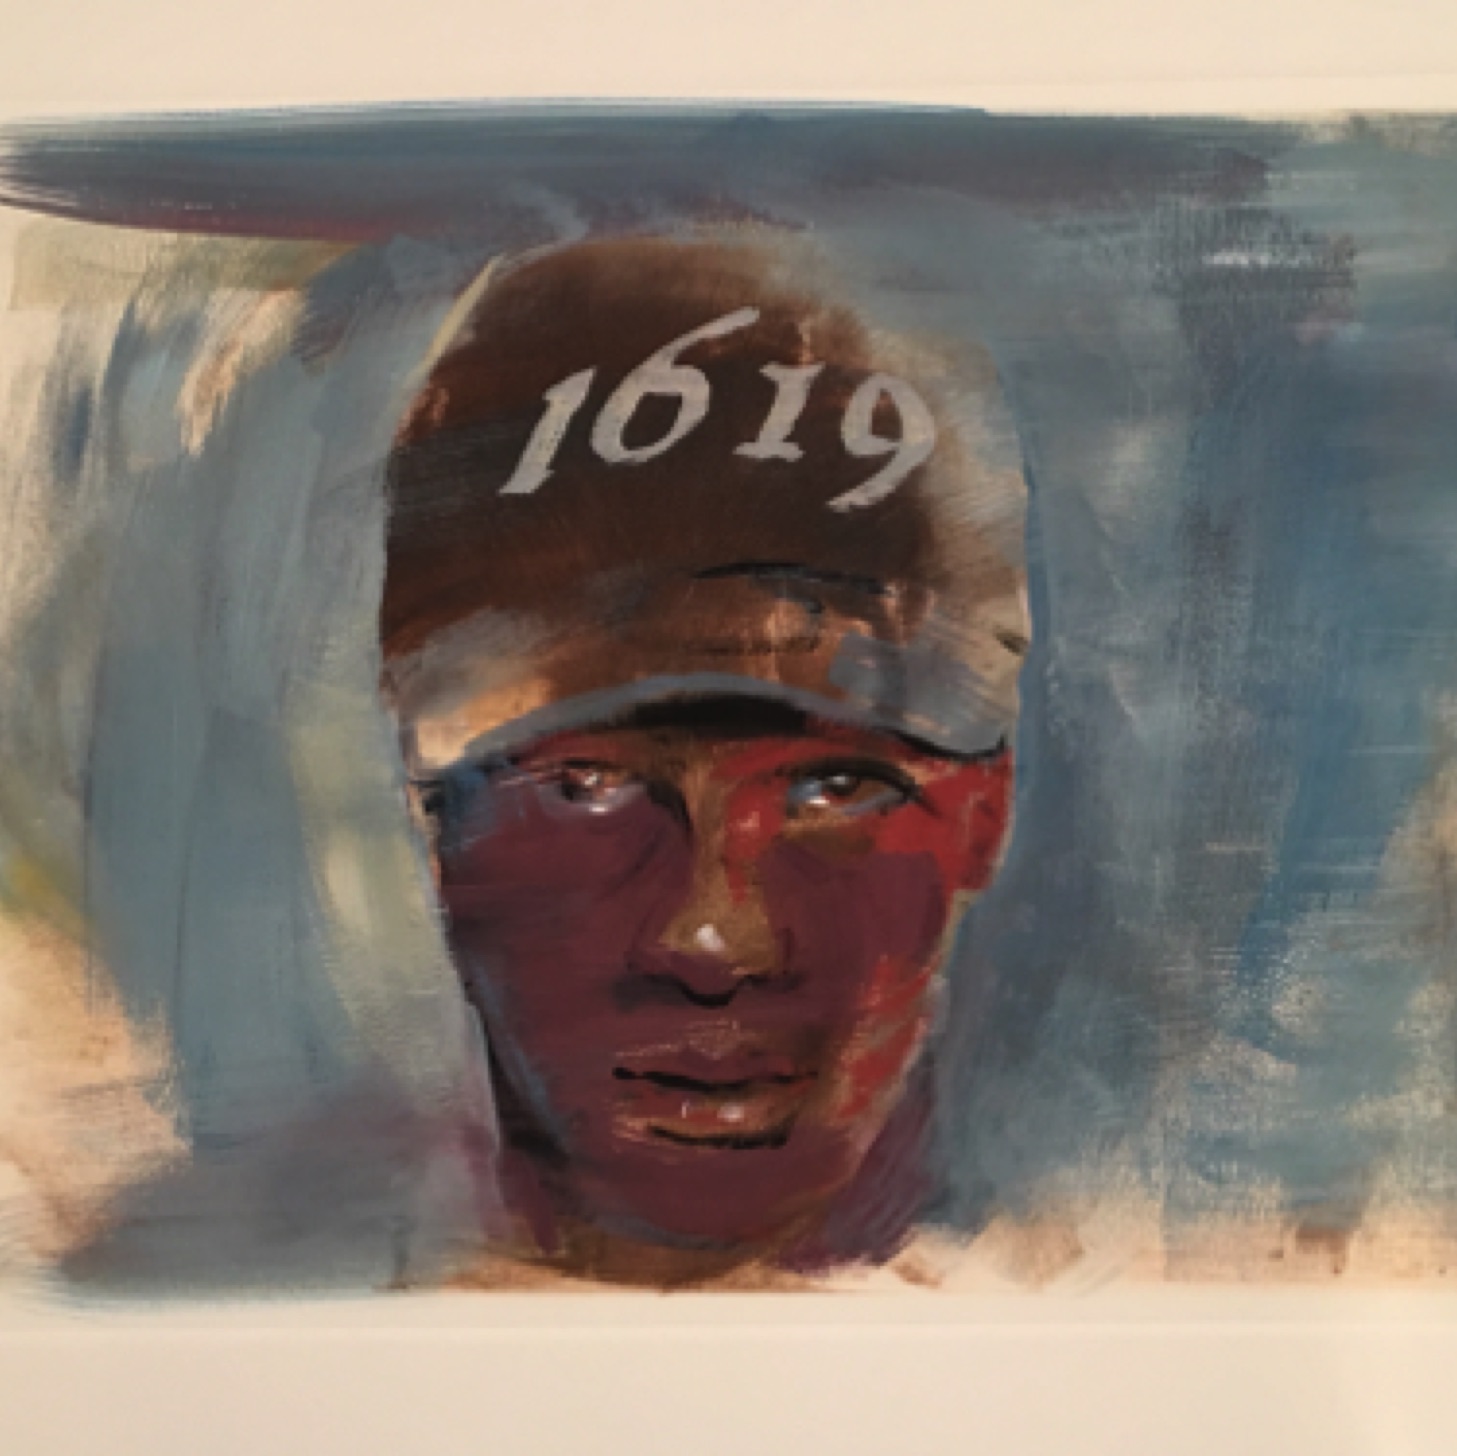 Gregg Chadwick
1619
 30”x22” gouache on paper 2019
   Private Collection, Los Angeles
(Exhibited and sold at The Other Art Fair, Los Angeles 2019)
  